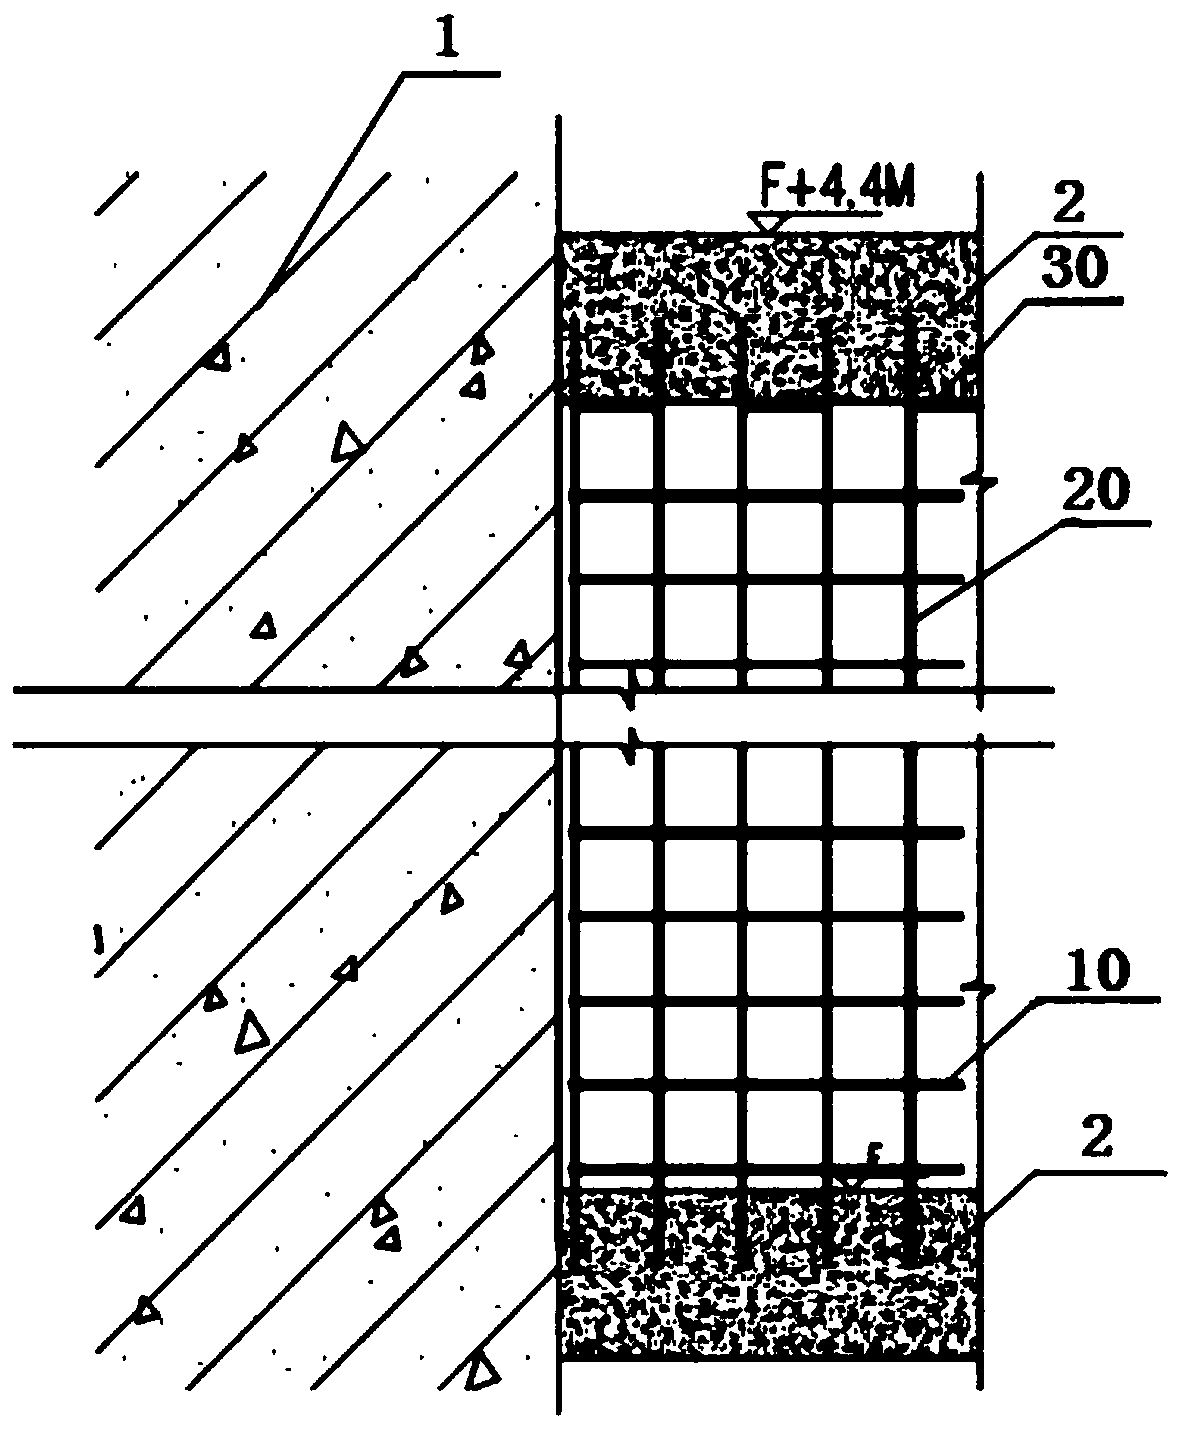 Construction method used for superhigh building fire elevator shaft wall and reinforced concrete wall